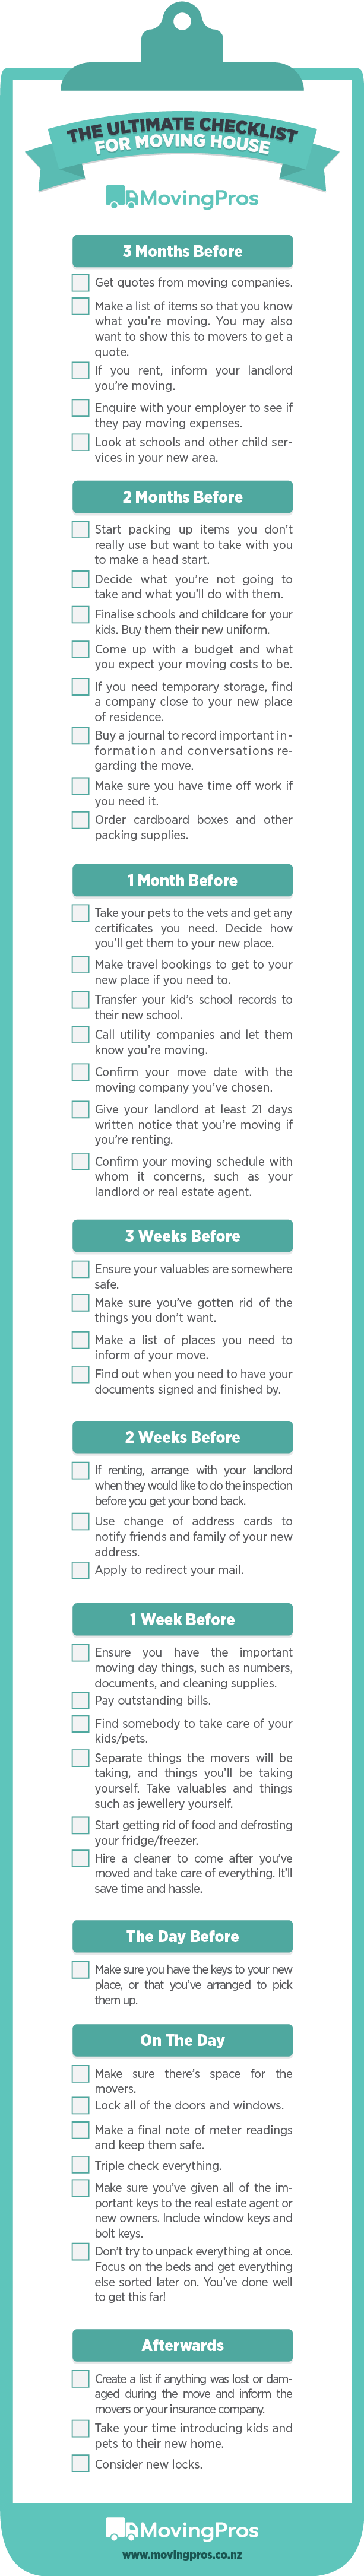 Moving House Checklist Infographic